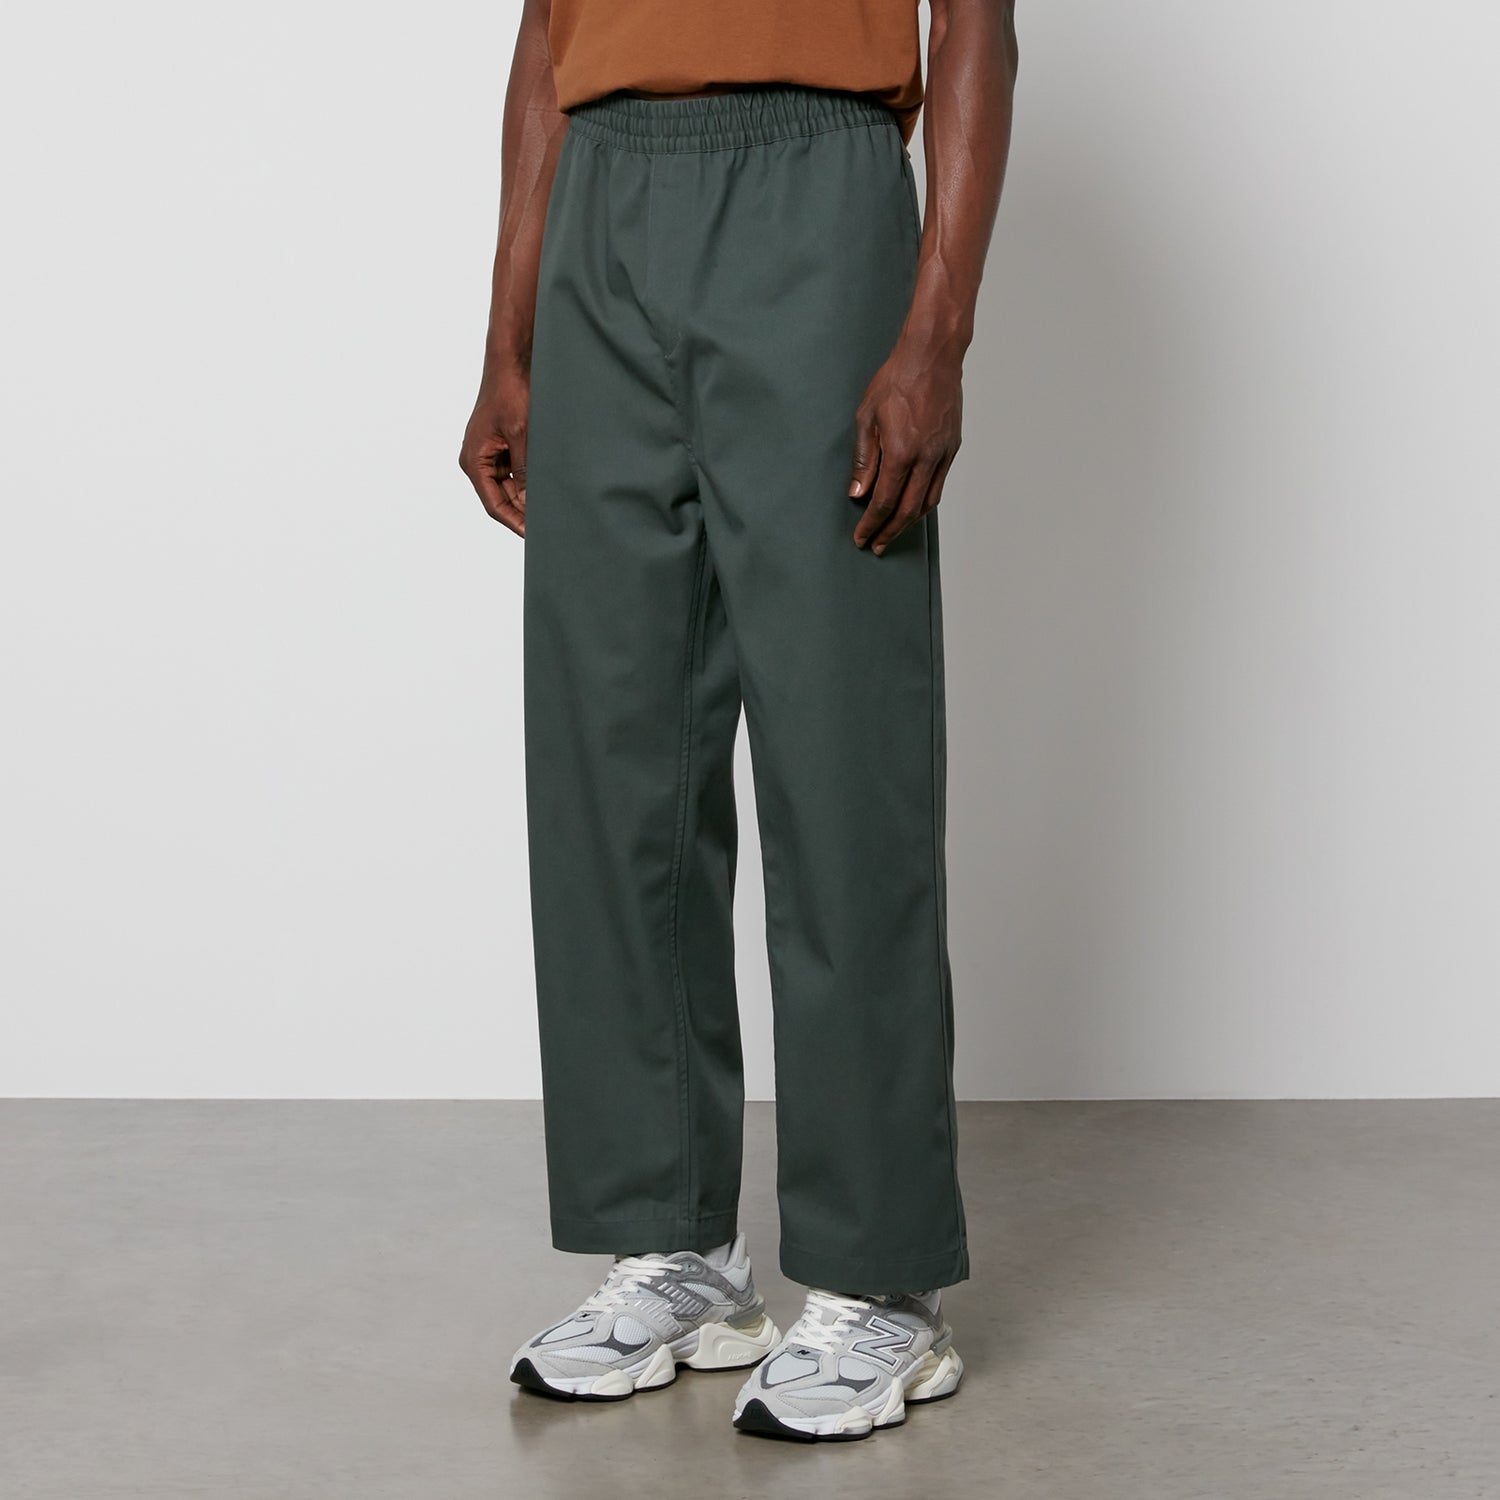 Carhartt WIP Newhaven Twill Trousers - S